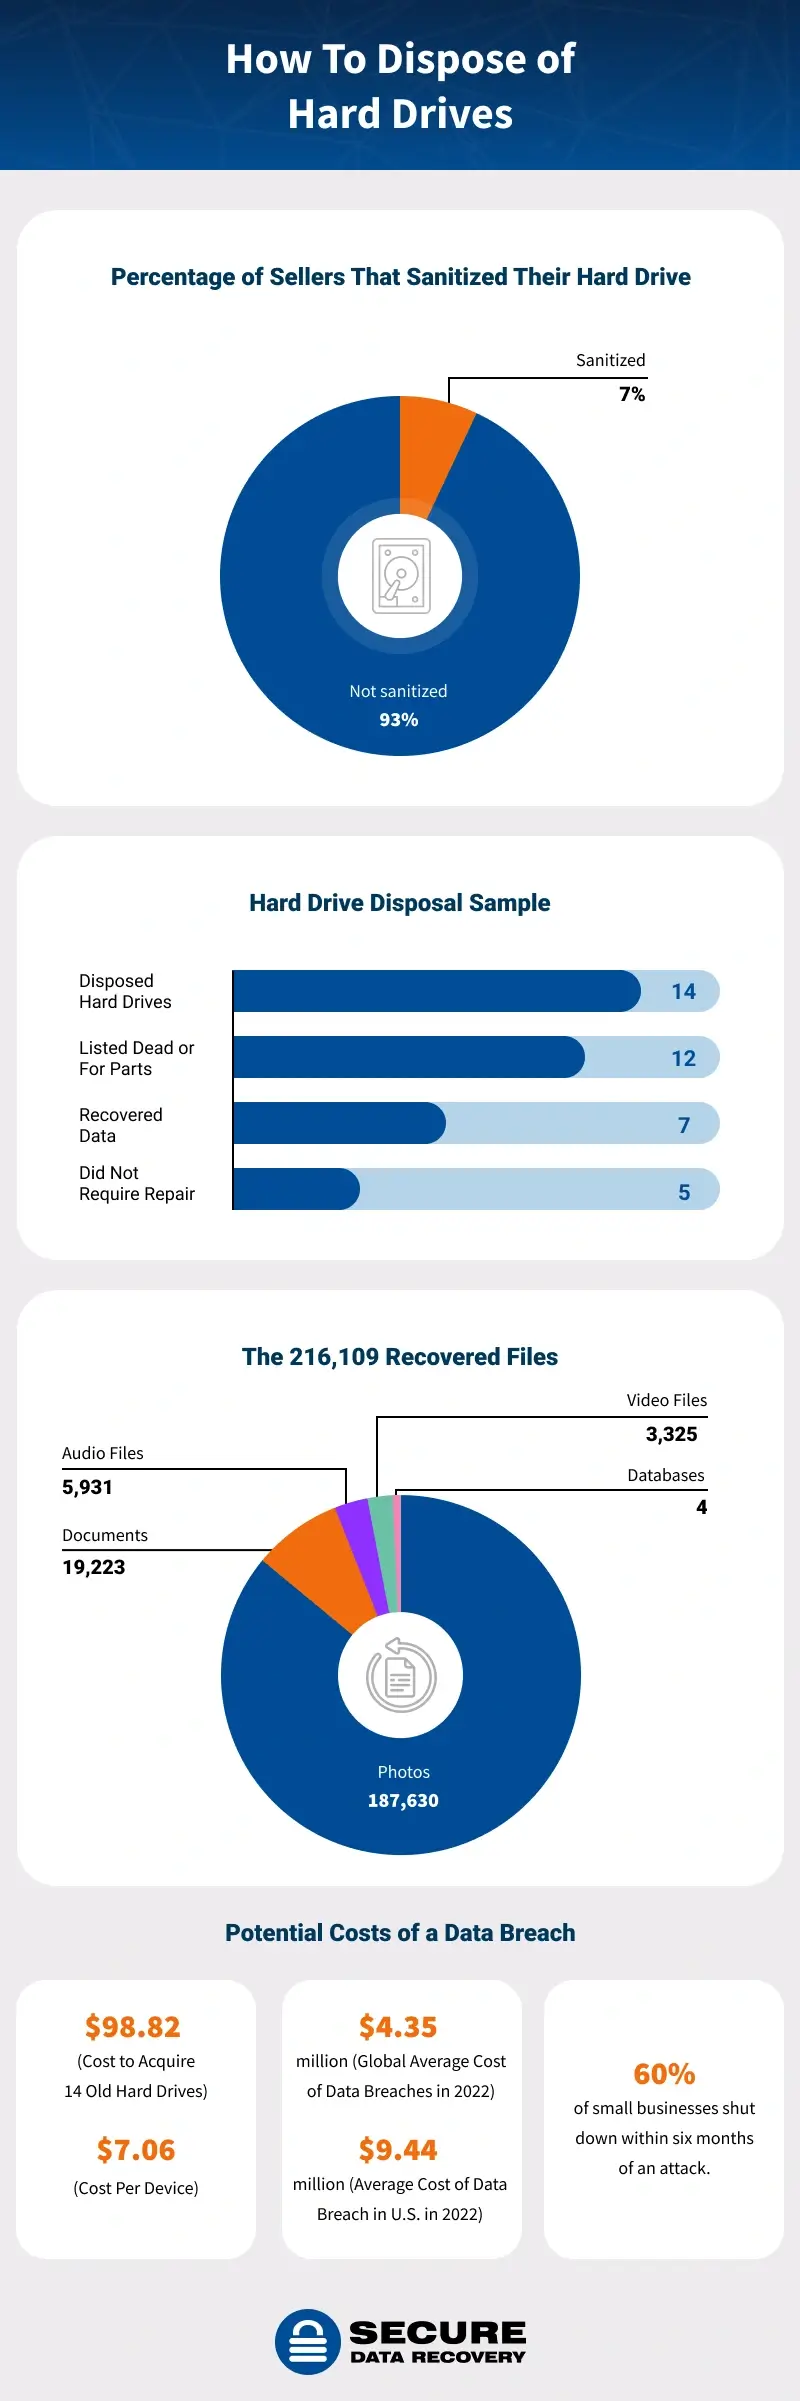 How to Dispose of Hard Drives Infographic